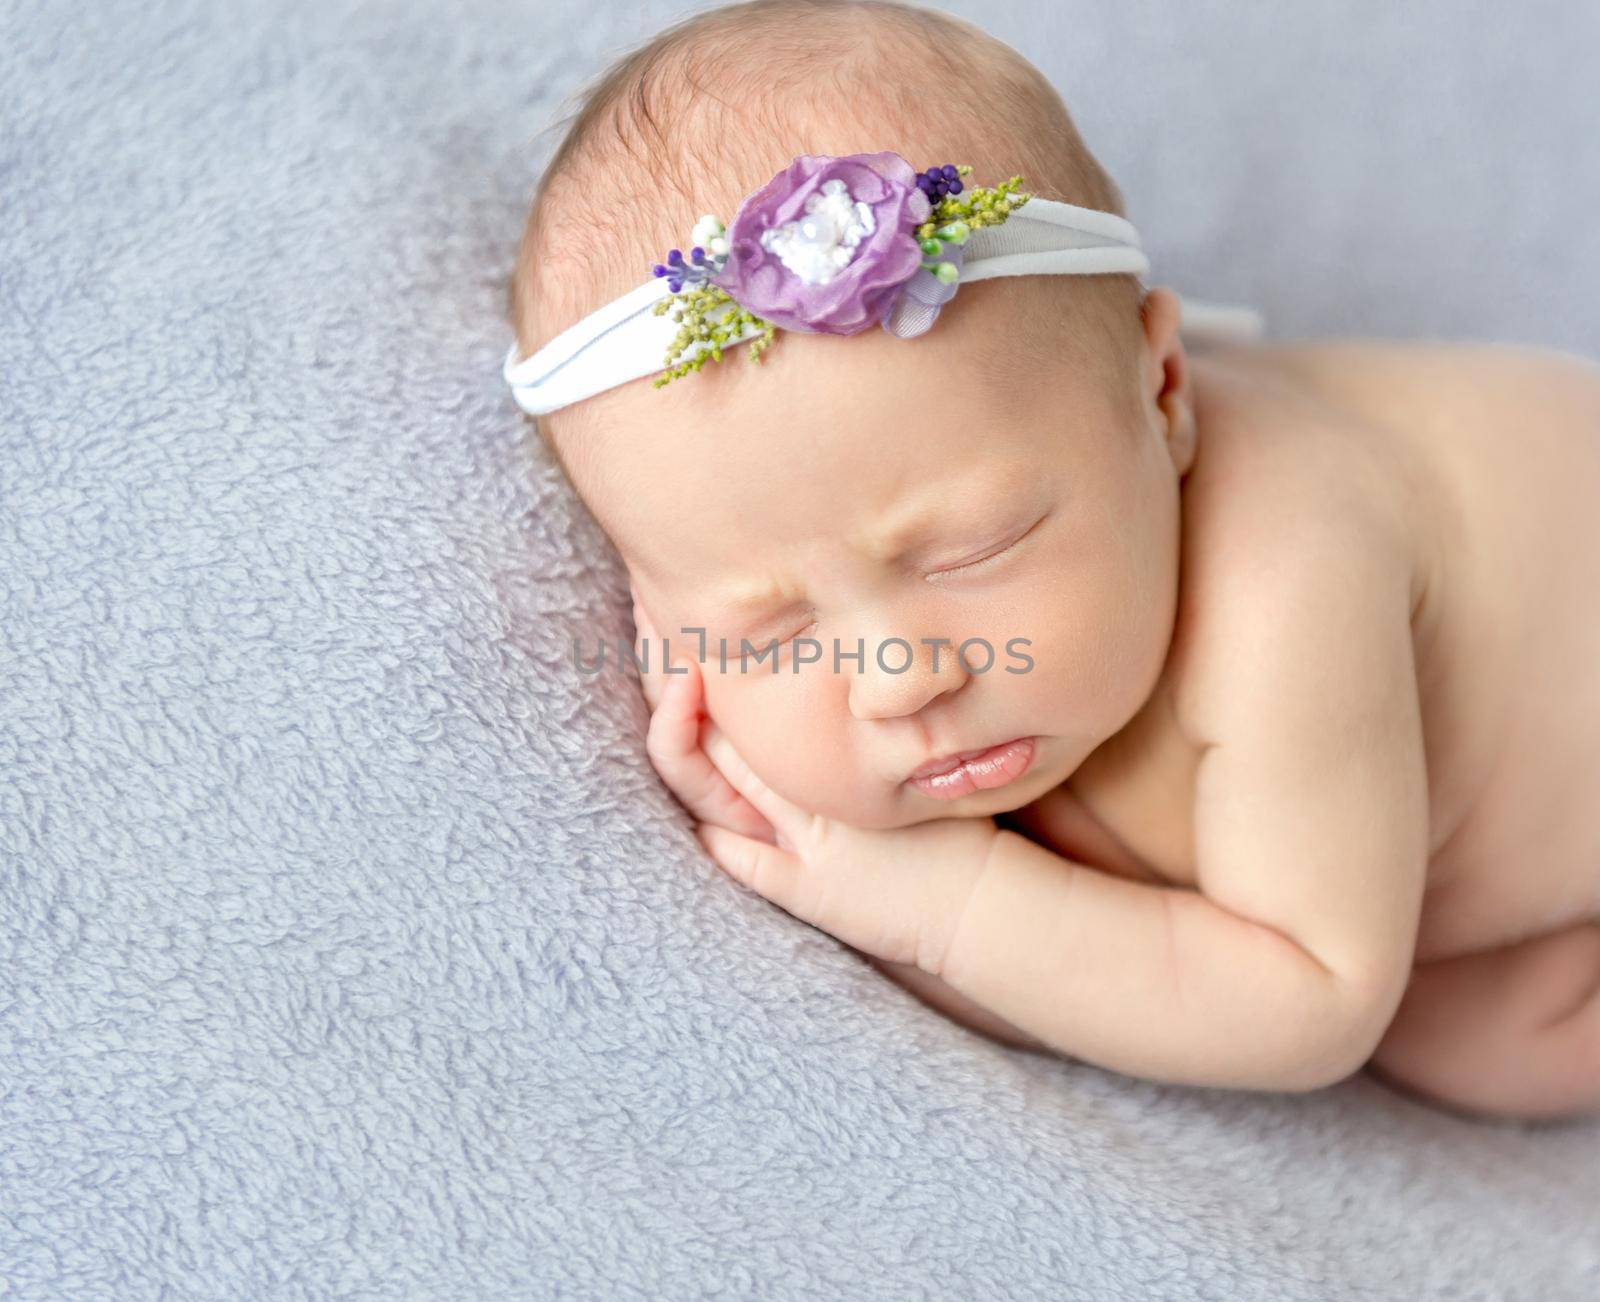 Naked baby girl wearing flowery hairband sleeping on her side, hands pressed to the cheek